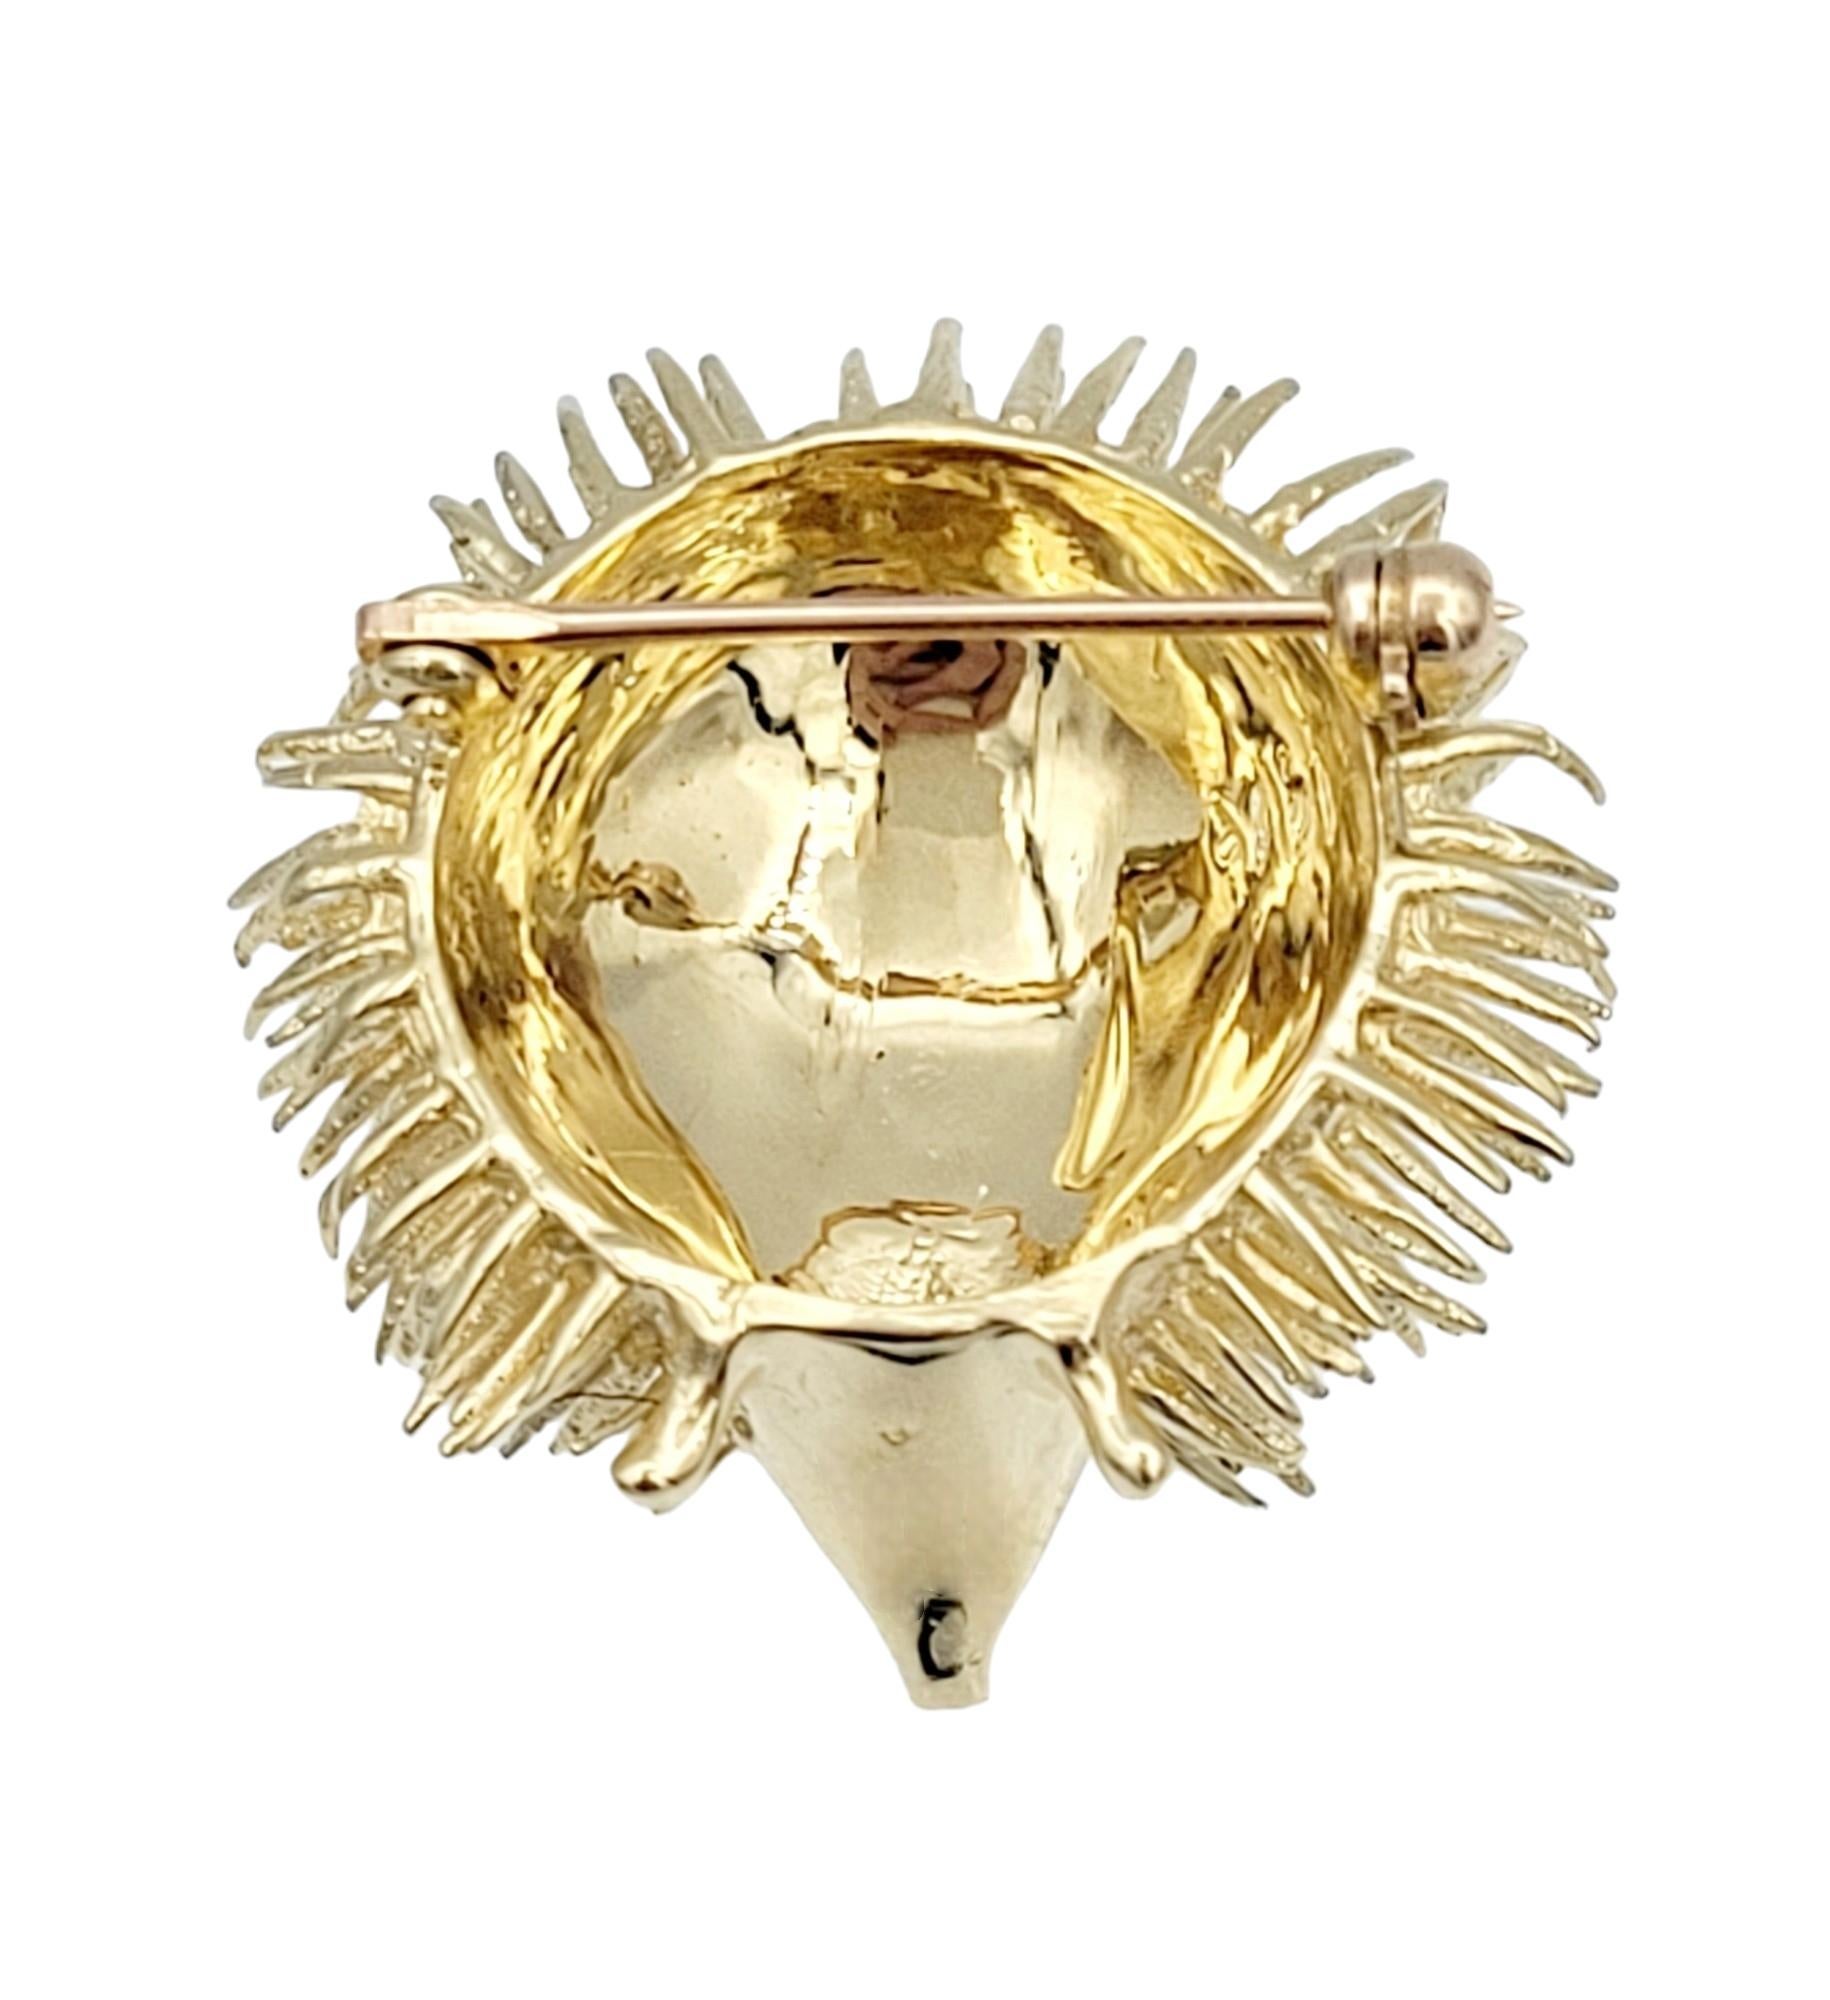 Spiky Round Hedgehog Brooch with Ruby Eyes Set in 14 Karat Yellow Gold In Good Condition For Sale In Scottsdale, AZ